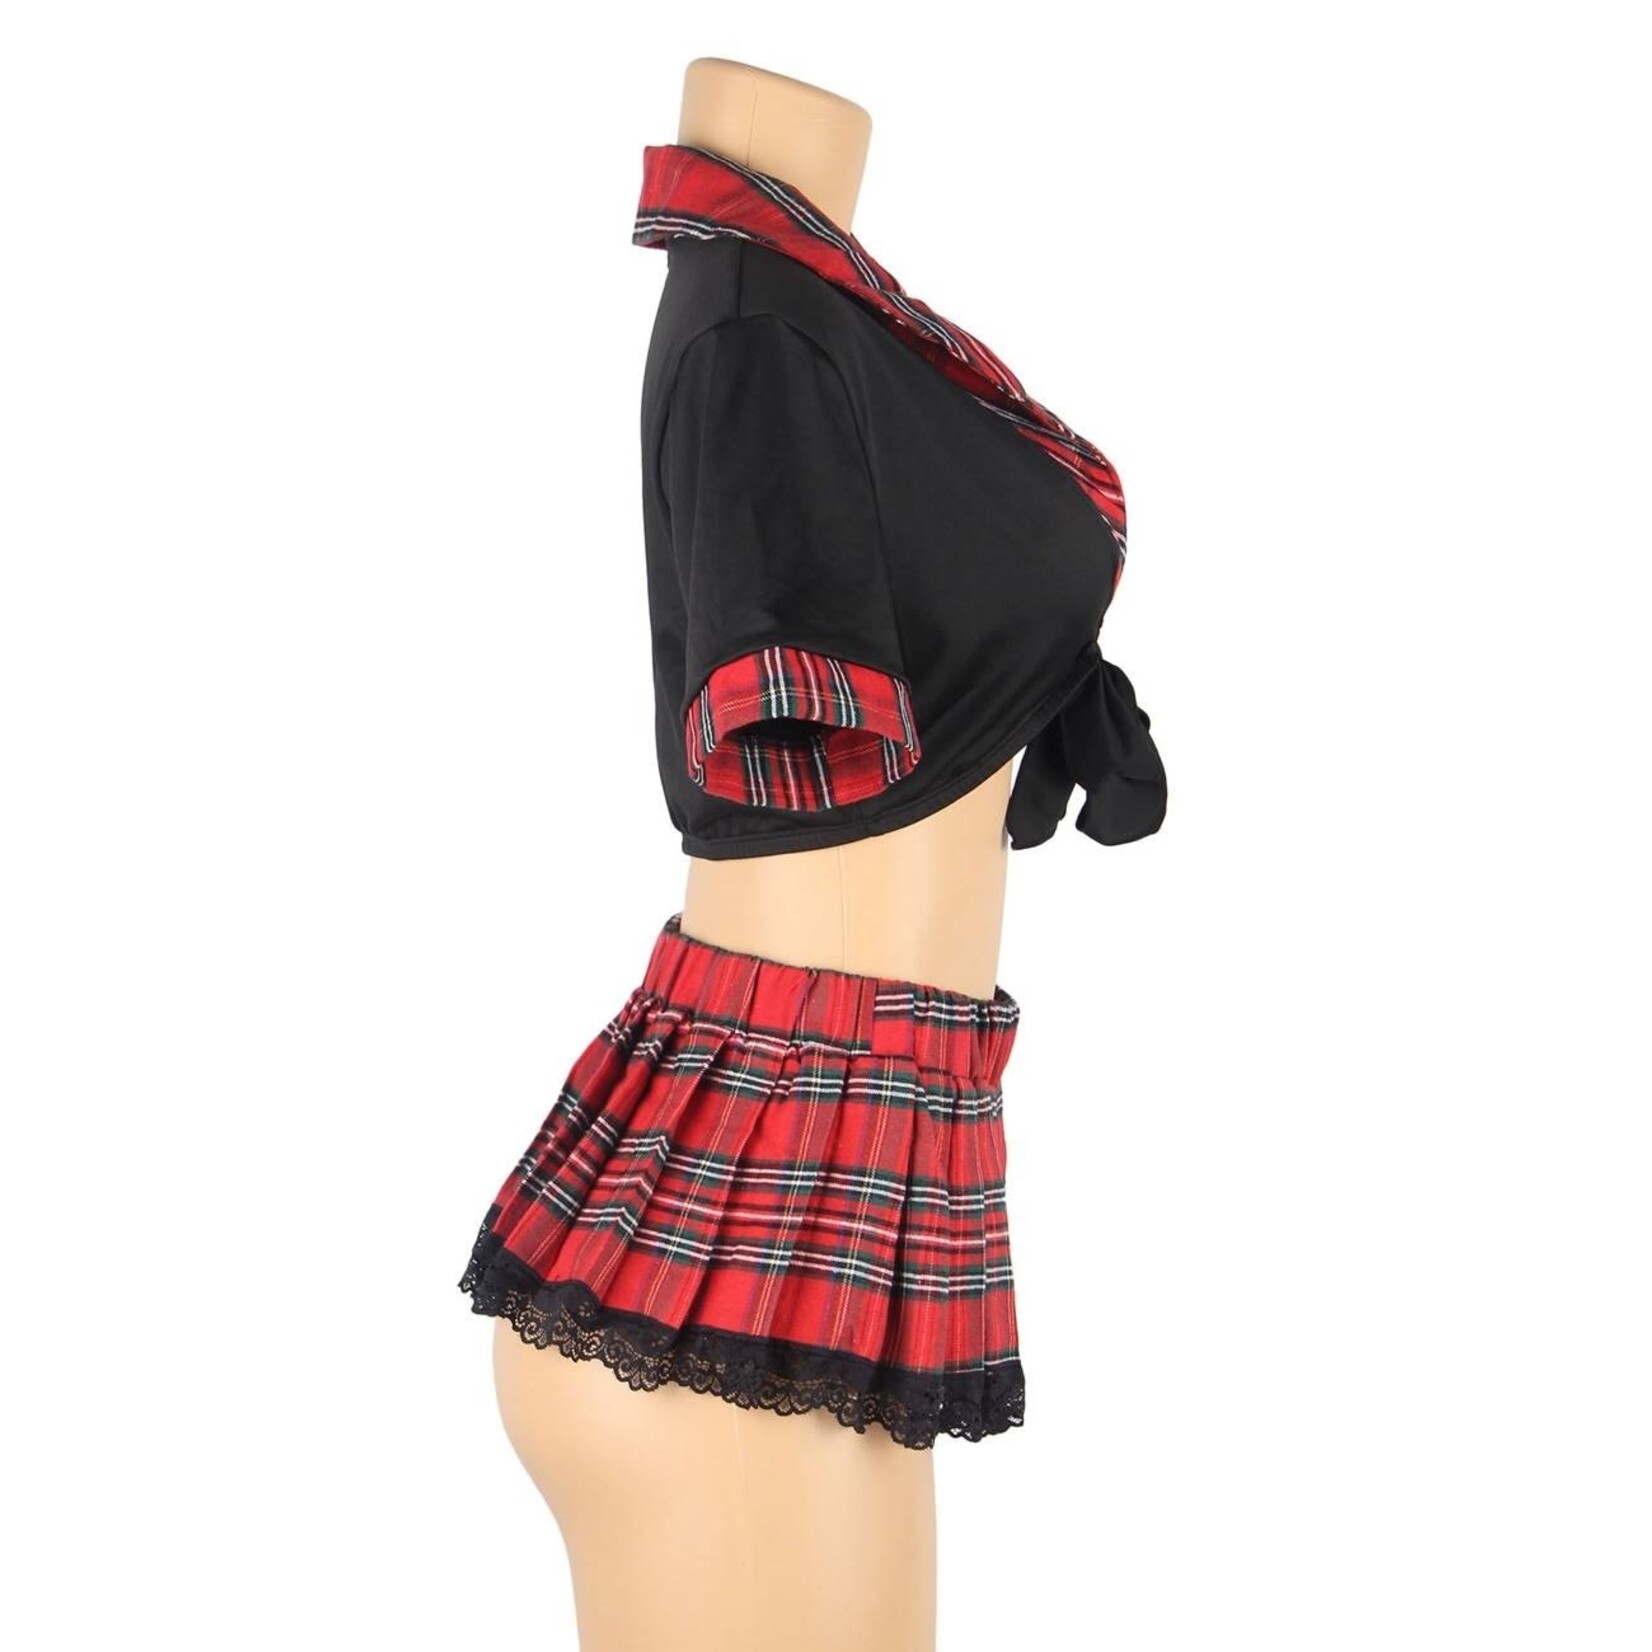 OH YEAH! -  SEXY UNIFORM HIGH-QUALITY STUDENT PLEATED SKIRT COLLEGE STYLE COSPLAY SUIT 3XL-4XL